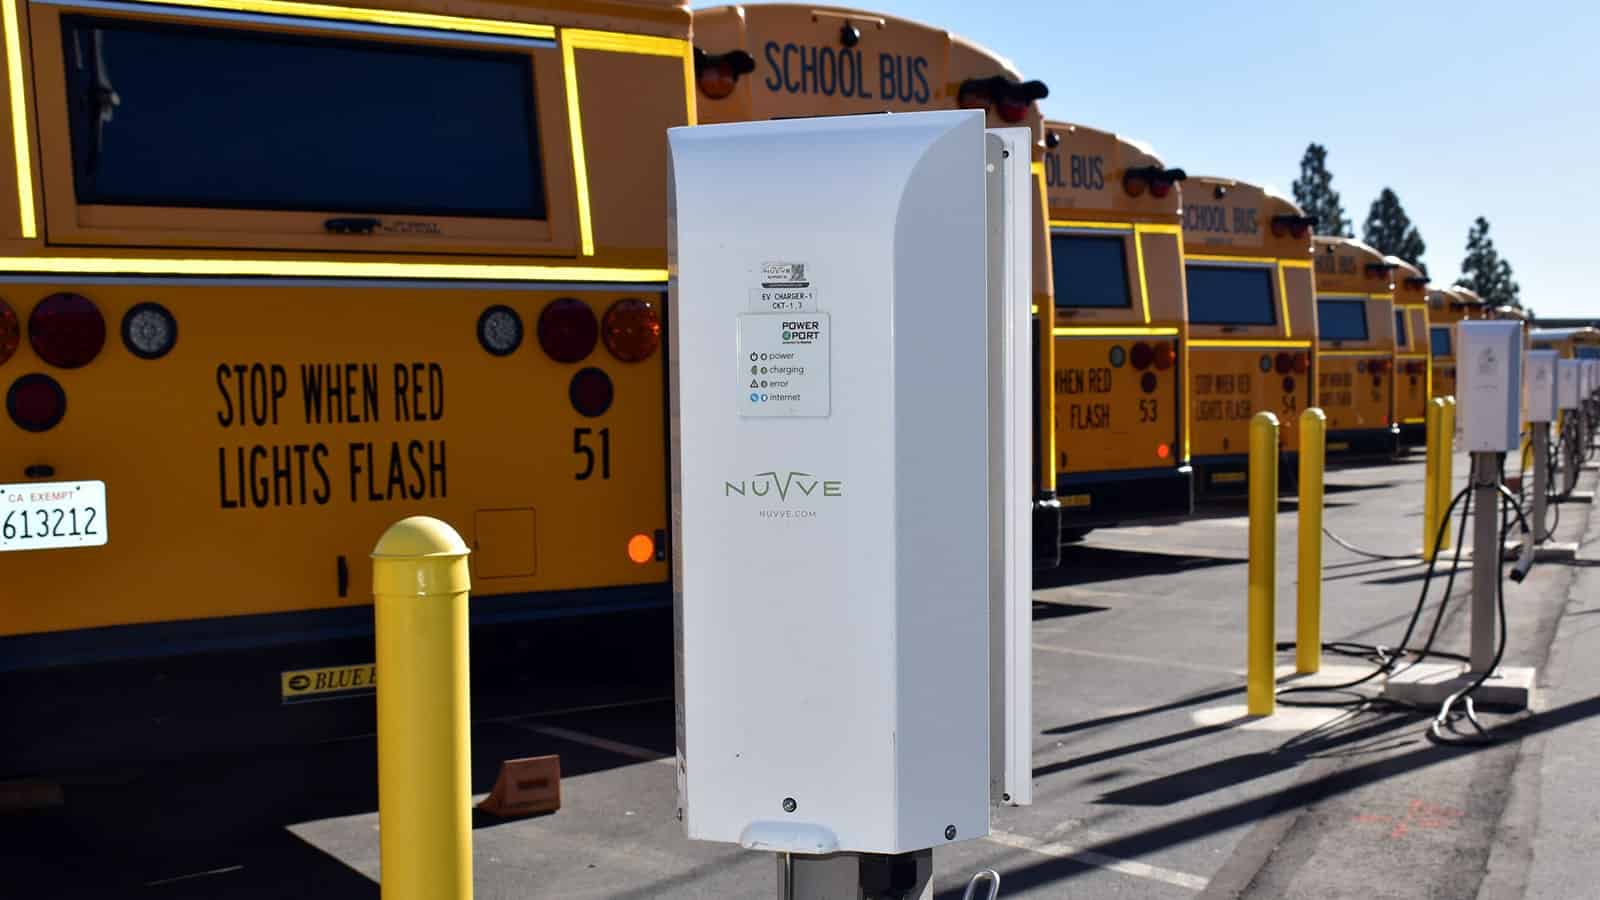 Nuvve EVSE in a row with electric school buses parked next to them ready to be charged.